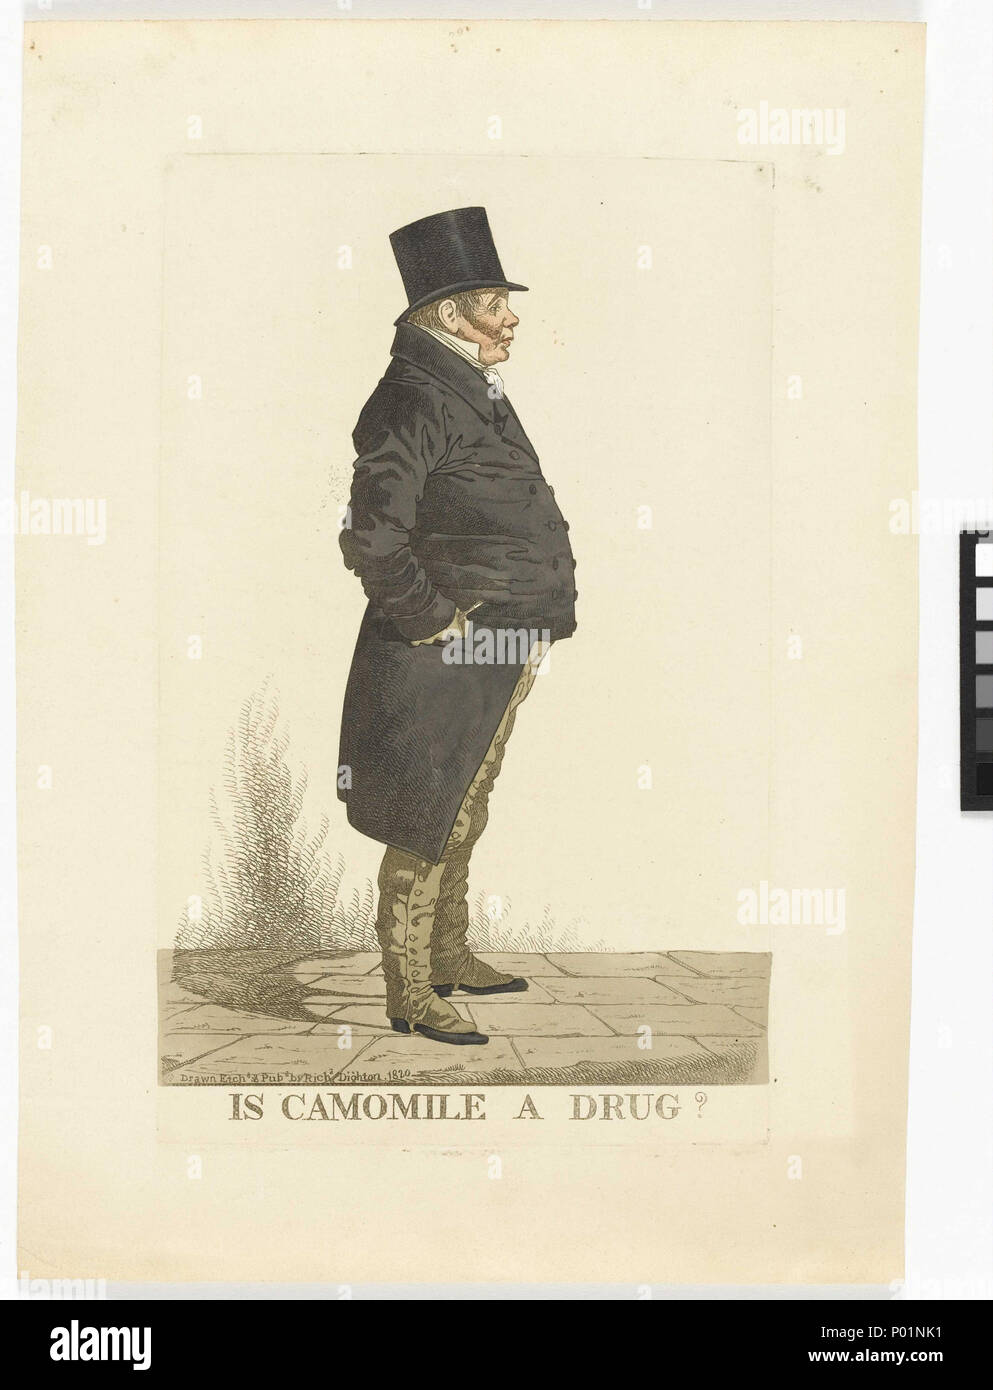 .  English: 'Is Camomile a Drug?' This caricature entitled 'Is Camomile a Drug?' shows a person identified as a Mr. Bowden standing, facing right in a top hat holding what appears to be a pencil in his clenched right fist. The title, 'Is Camomile a Drug?' refers to ... [Contact NPL see if they have any clues as they have a similar print - NPG D13371; NPG D13514; NPG D13704] Richard Dighton (1795/6-1865) was the son of Robert Dighton (1751-1814), a singer and draughtsman whose father in turn had been a printseller. Robert Dighton began producing caricatures in 1781 and continued until his death Stock Photo